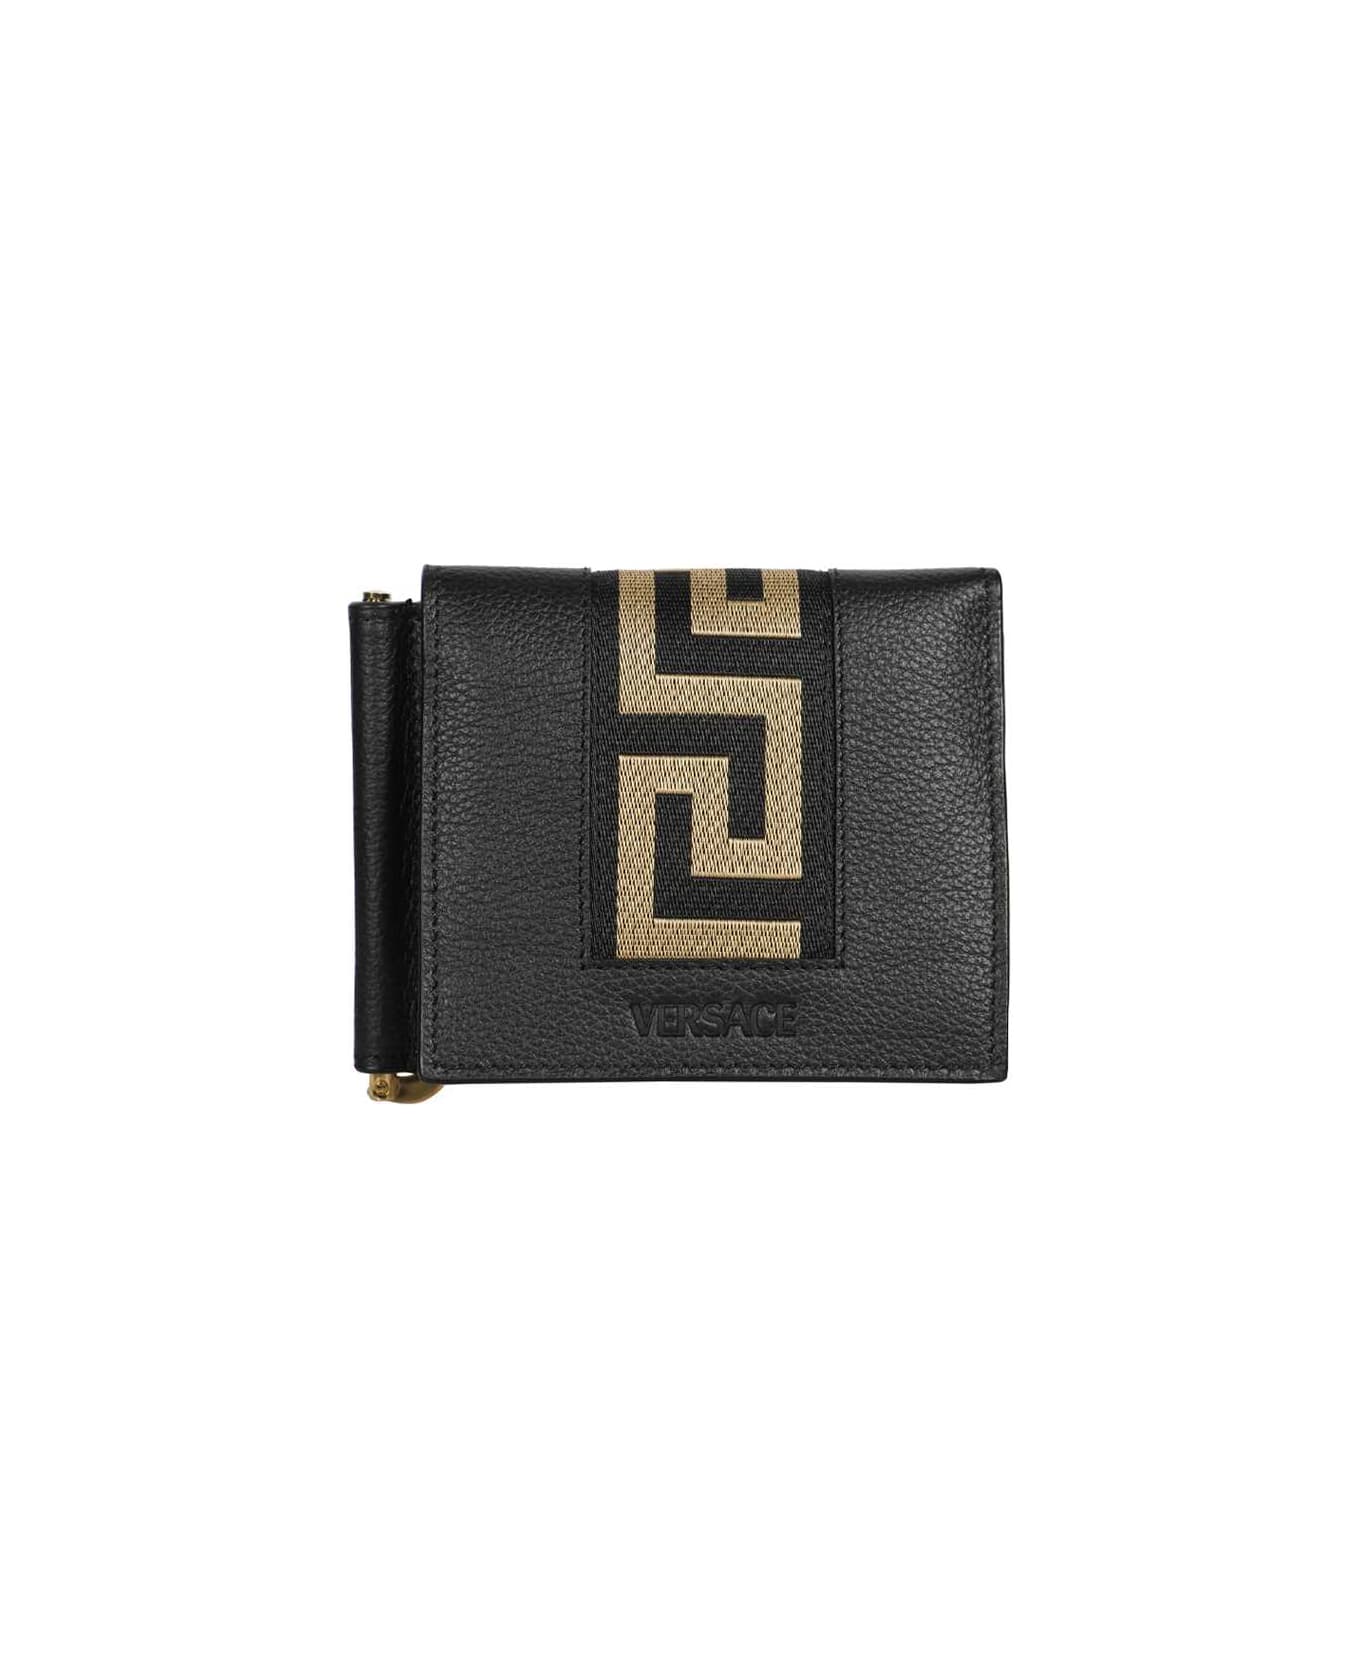 Versace Leather Flap-over Wallet - black 財布